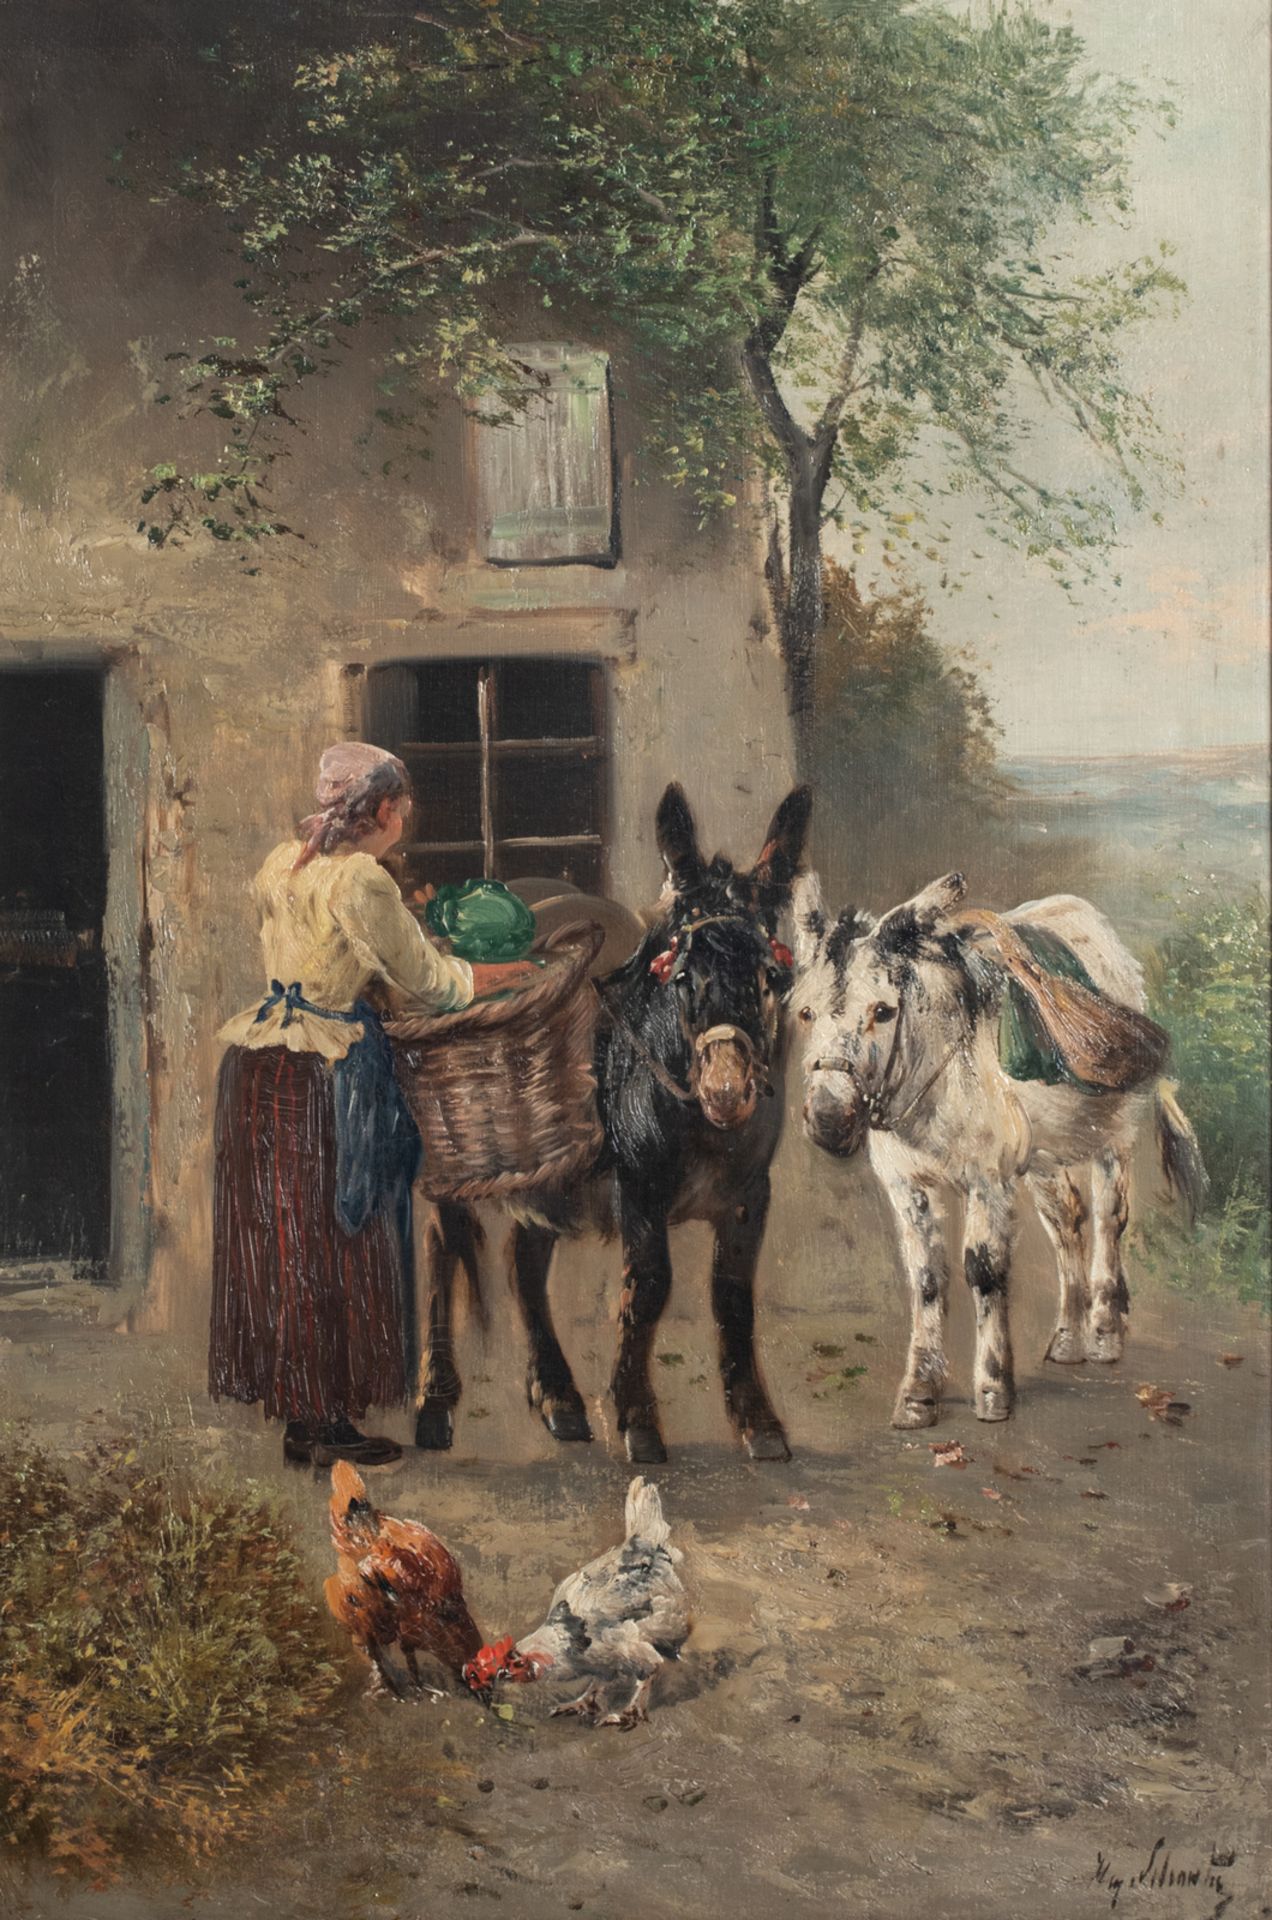 Schouten H., loading wares for the market, oil on canvas, 61 x 90 cm